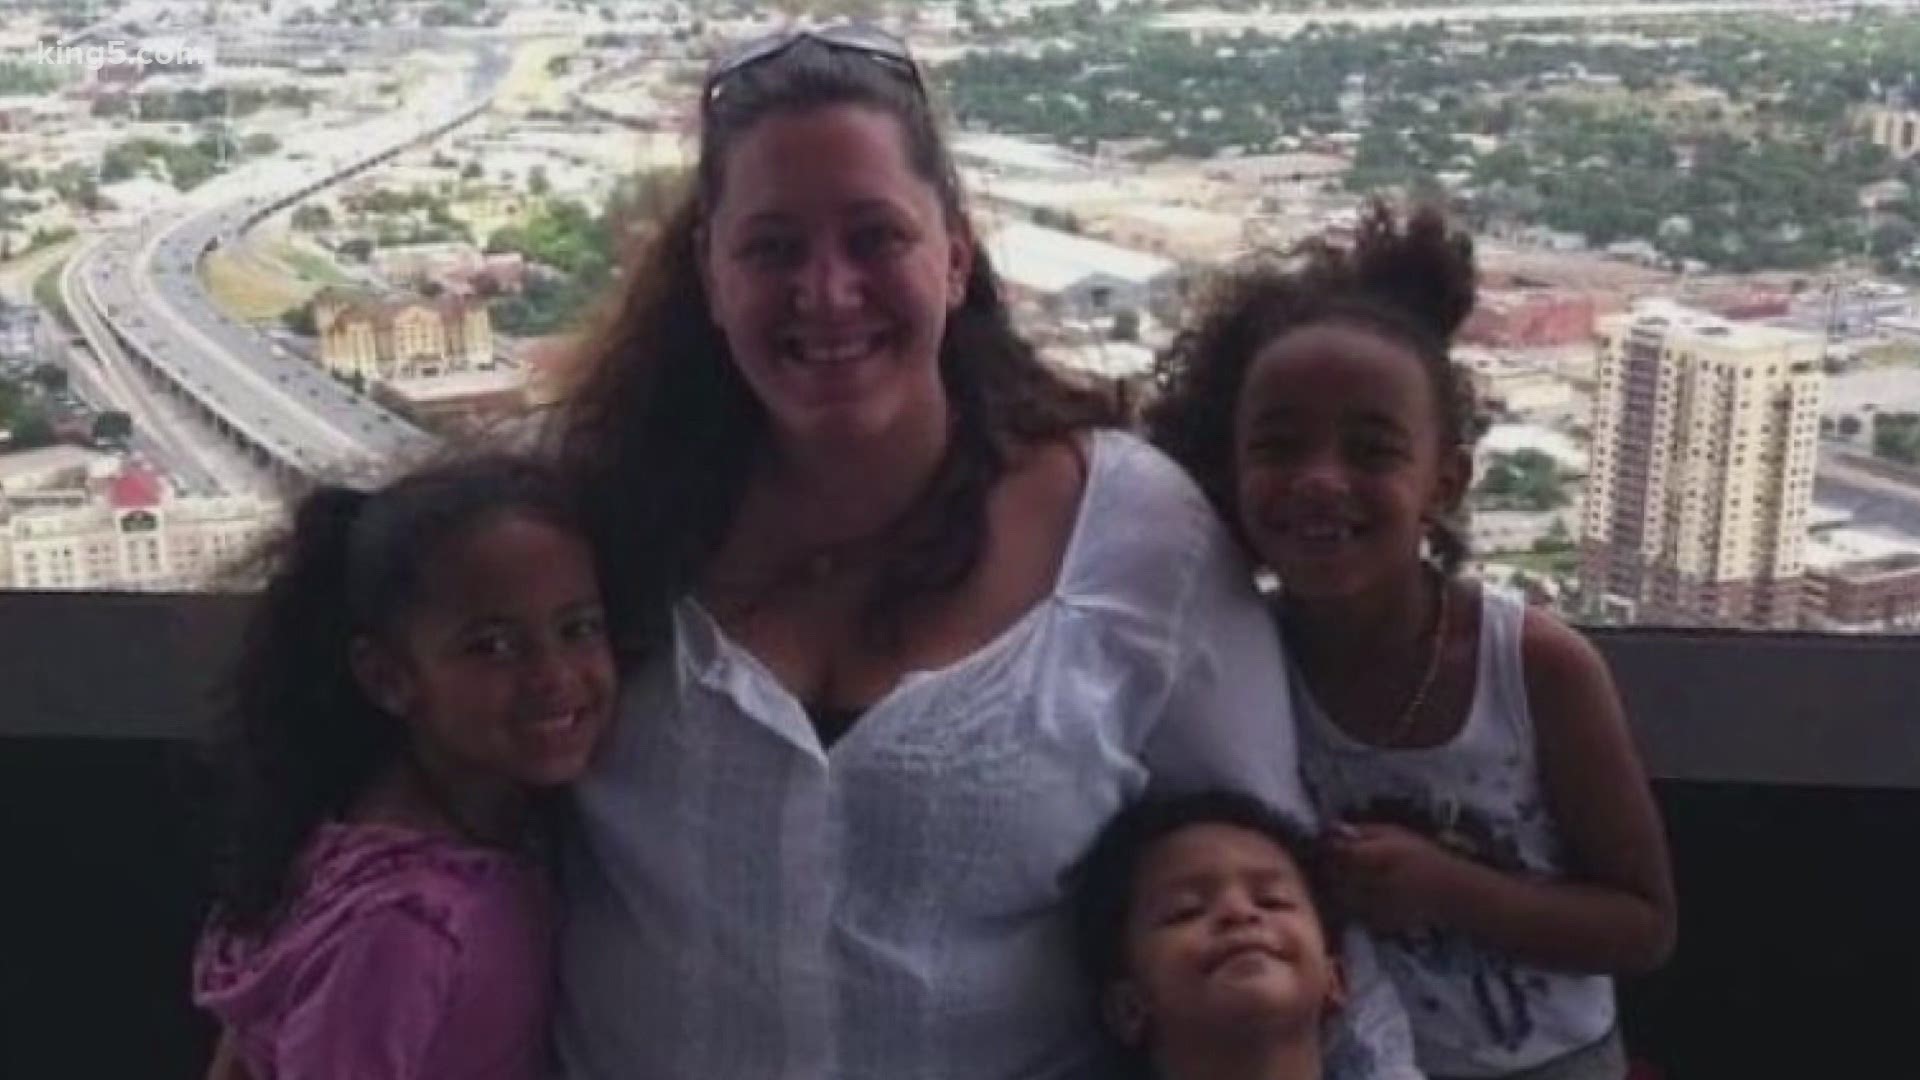 Susan and Craig Smith were killed Jan. 3, in a car crash in San Antonio, Texas. Their four kids who were also in the van survived.